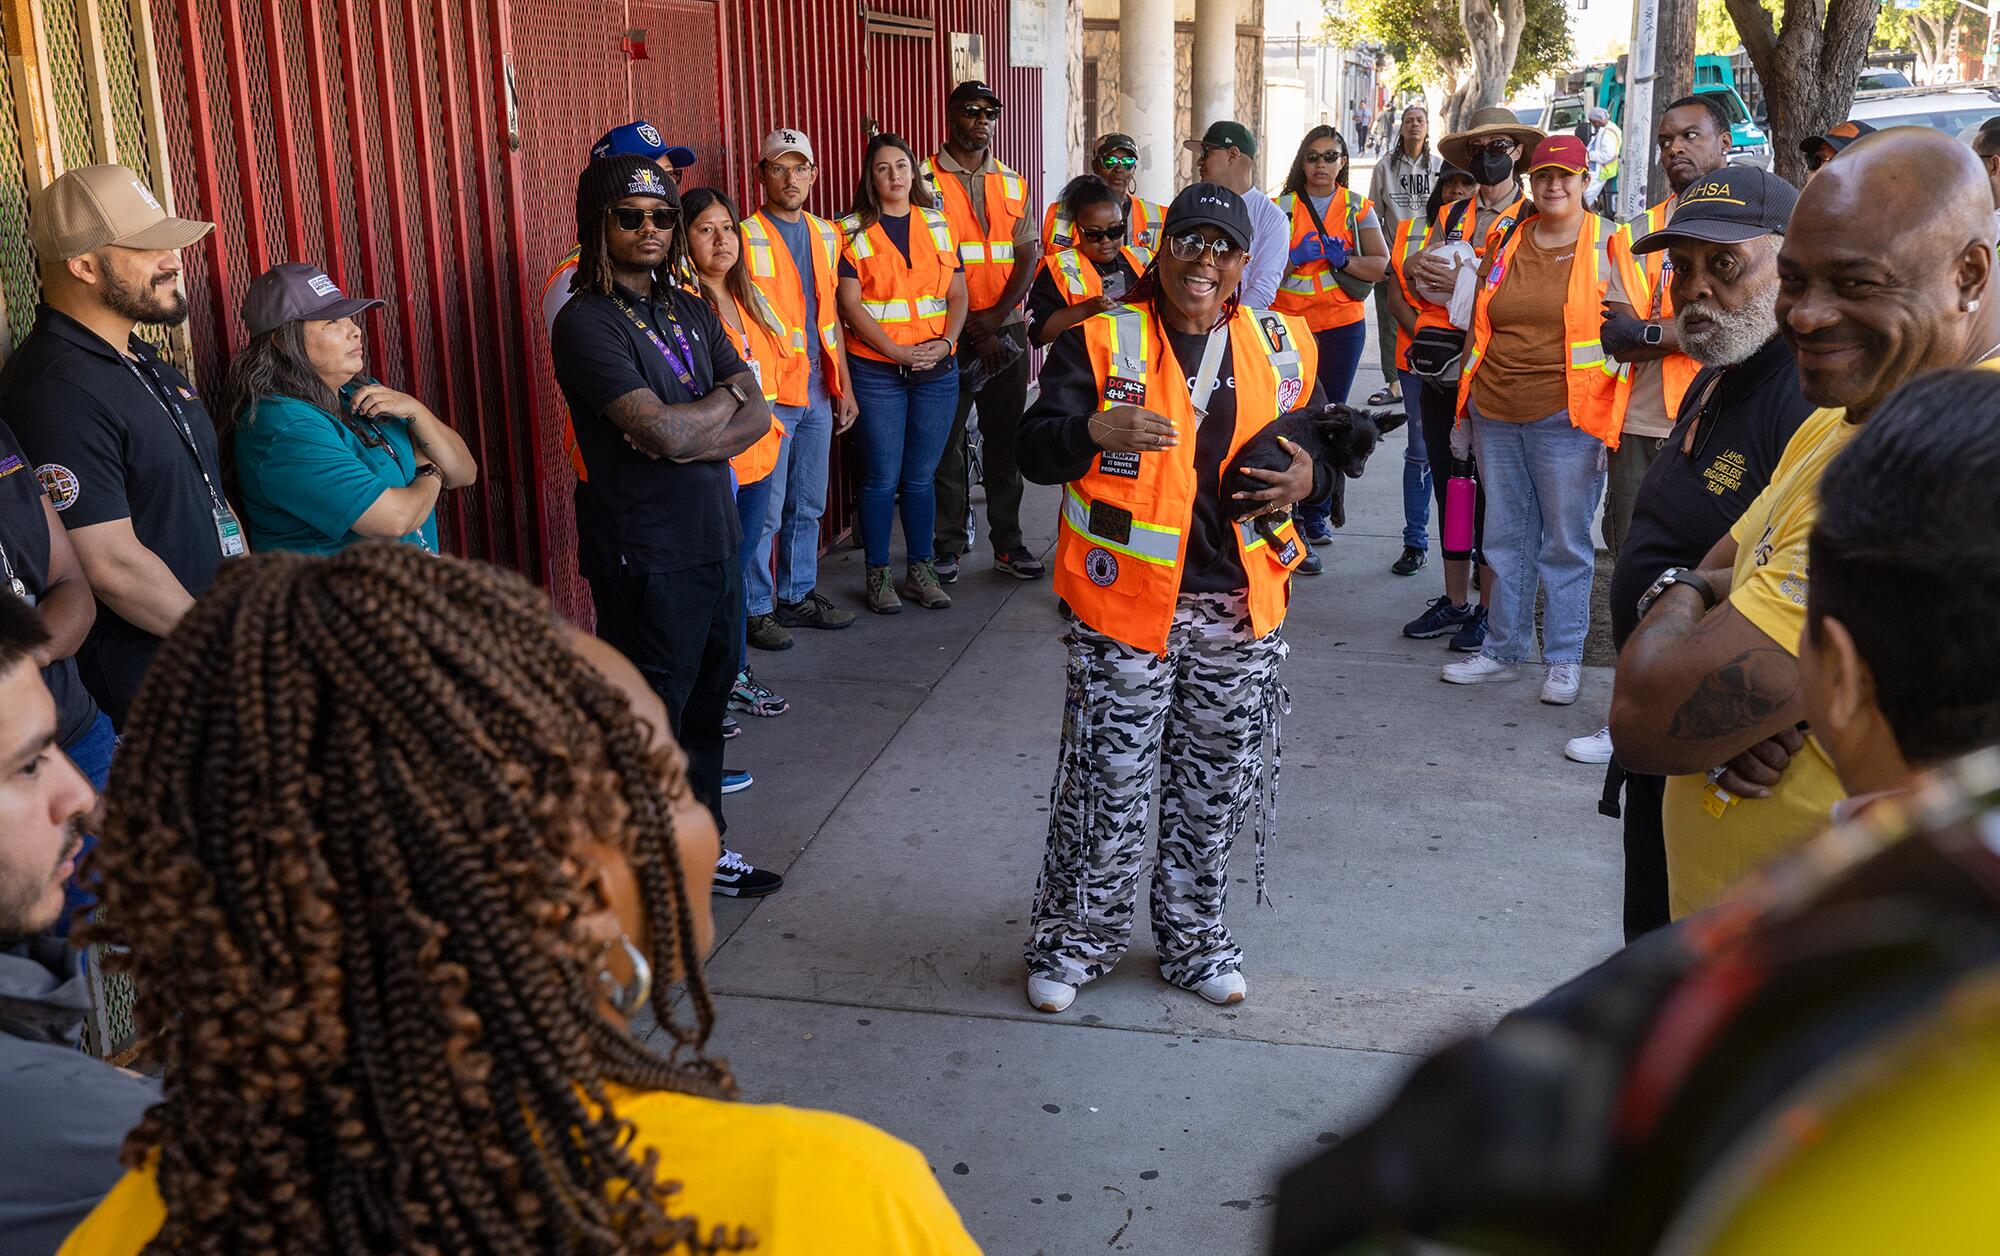 Inside Safe's Annetta Wells instructs employees before they enter a homeless camp in South L.A.